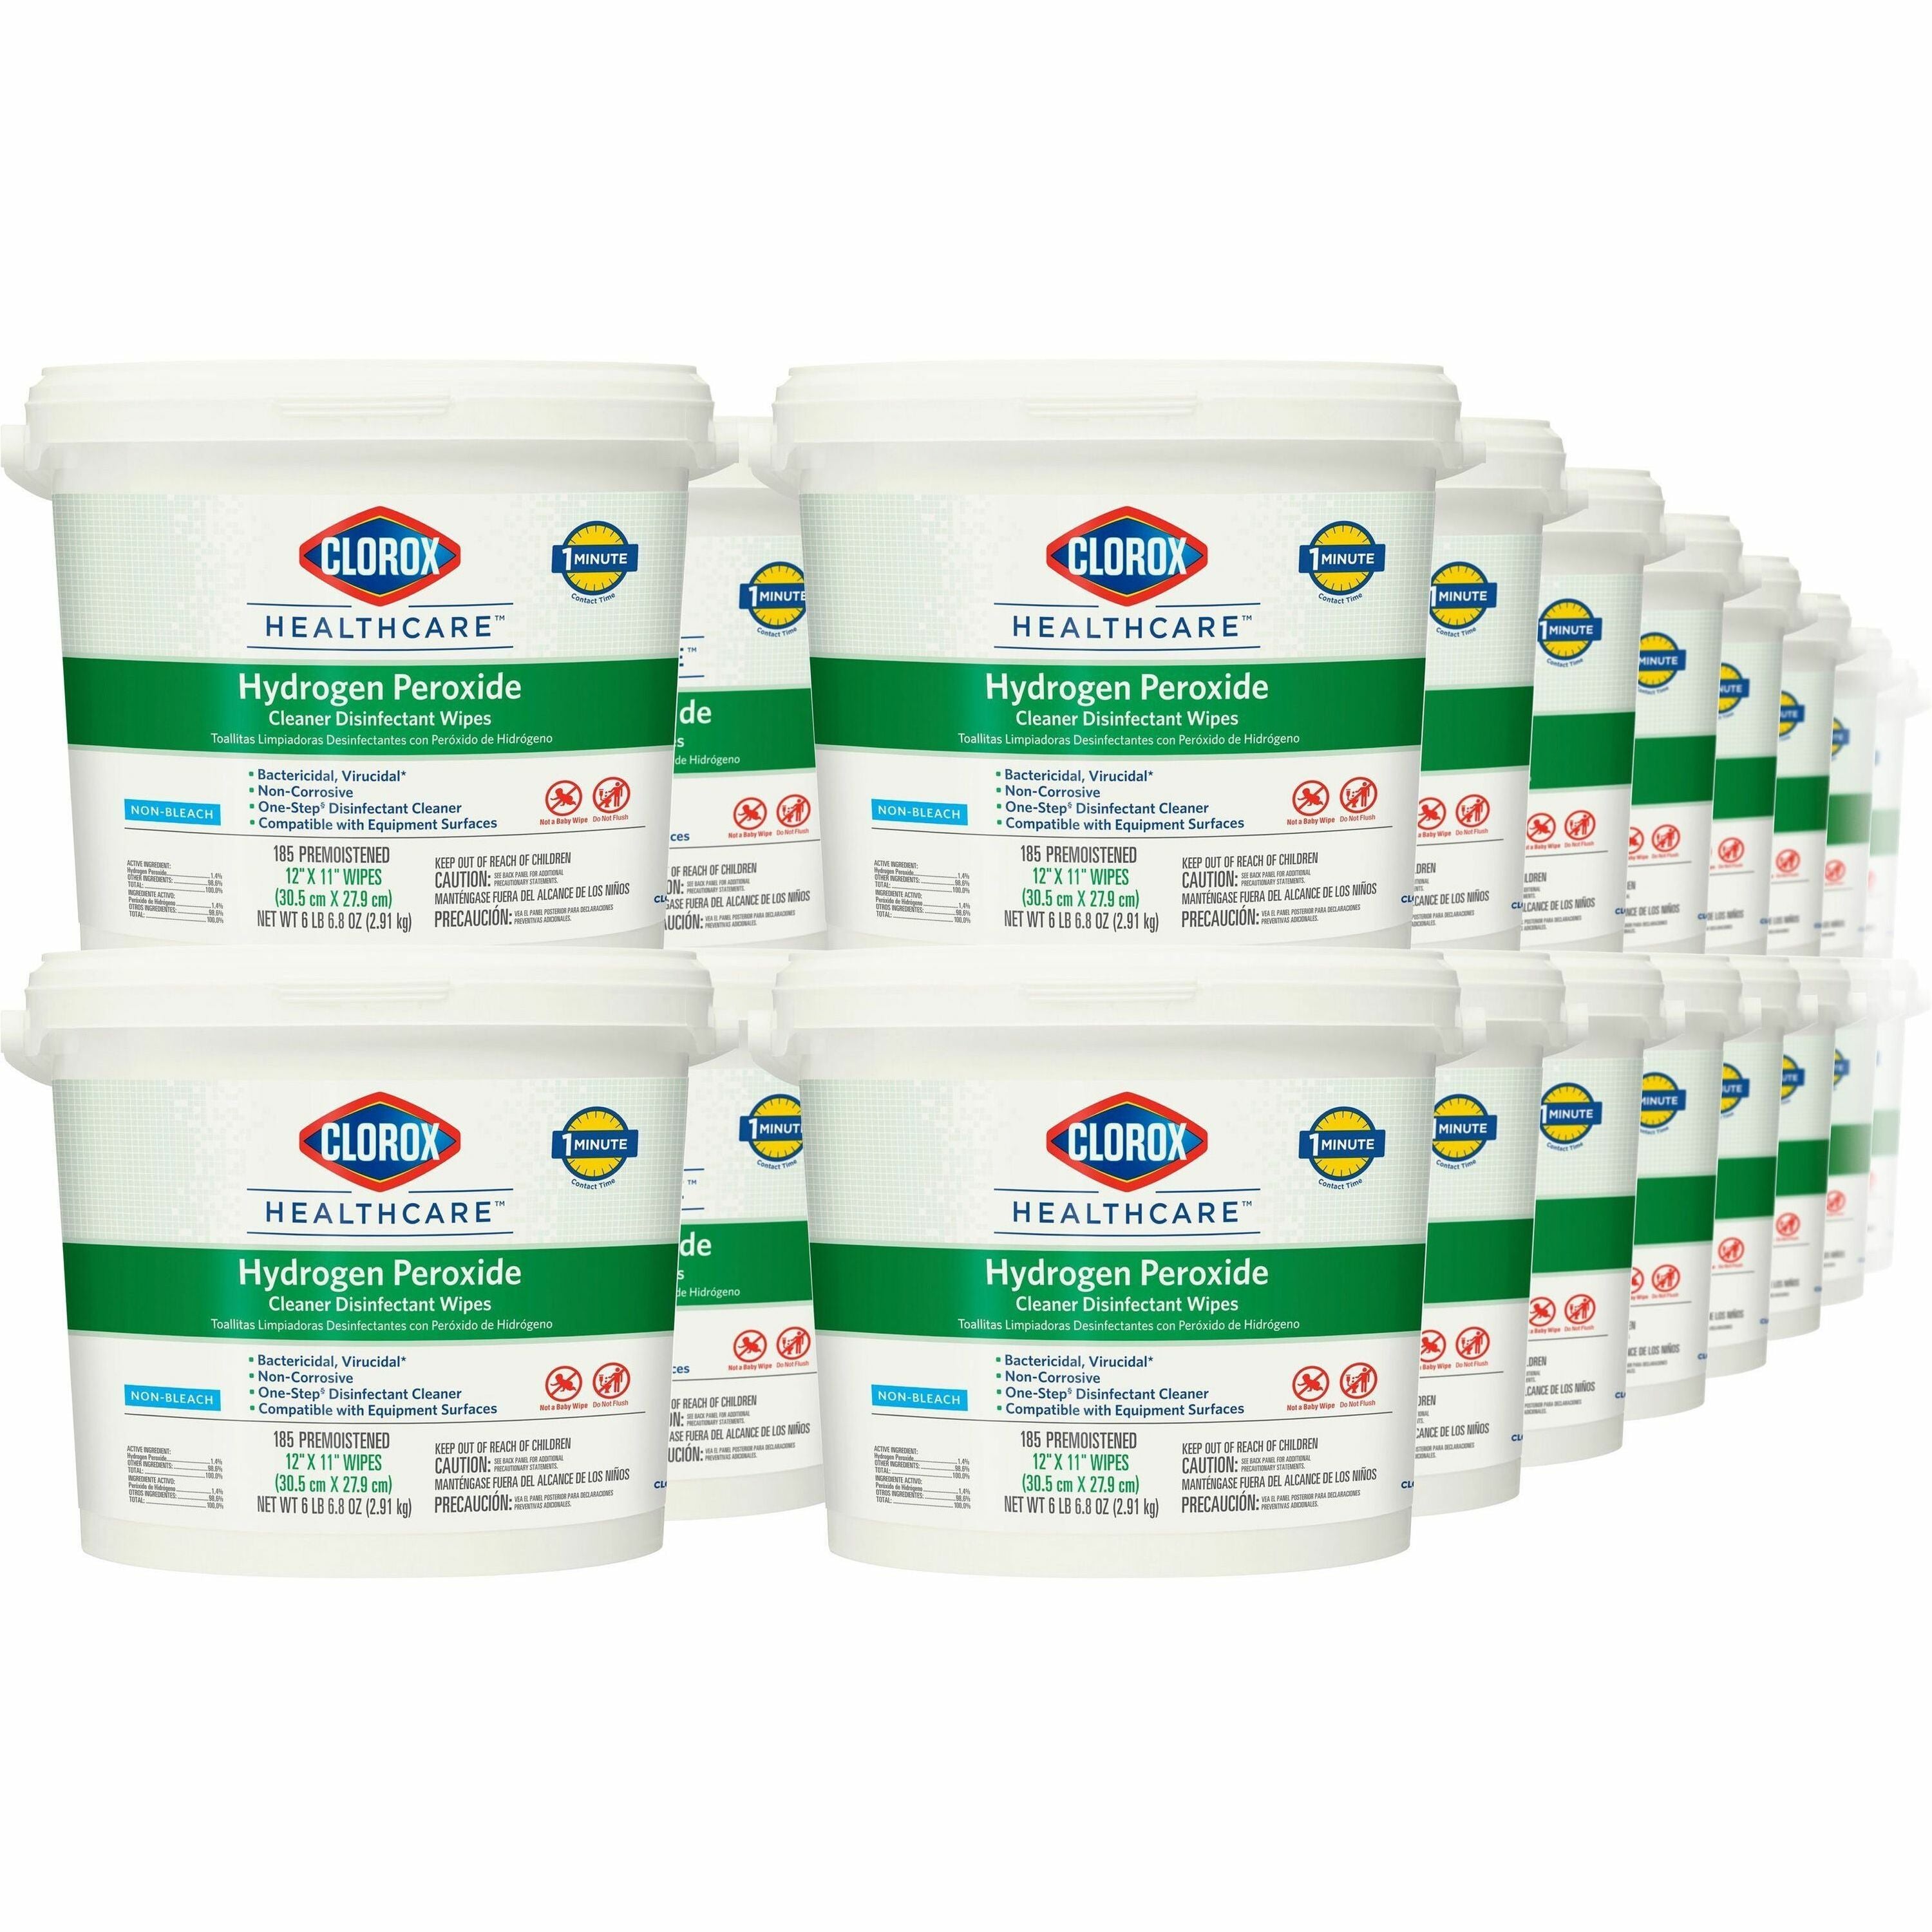 Clorox Healthcare Hydrogen Peroxide Cleaner Disinfectant Wipes - 185 / Bucket - 100 / Pallet - Bleach-free, Antibacterial - White - 1